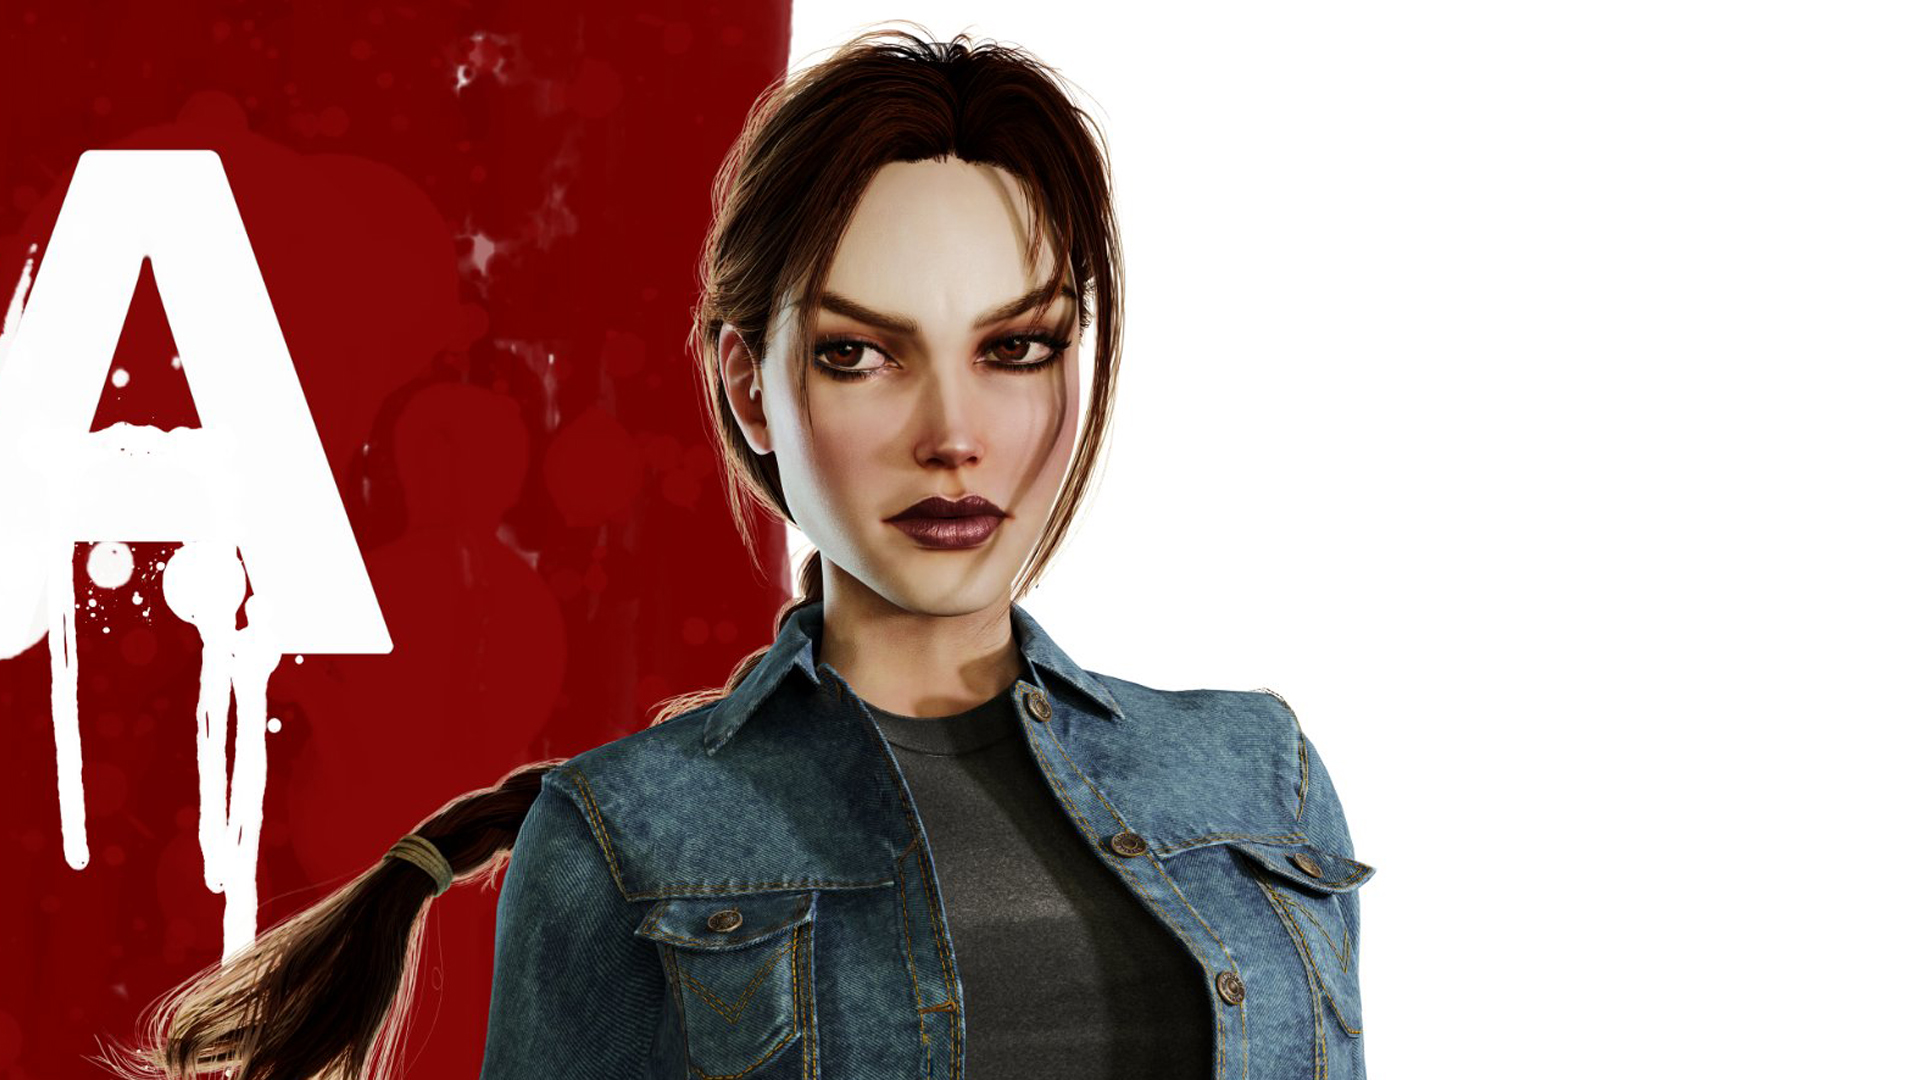 Tomb Raider: Angel of Darkness remake shows off Lara in jeans | PCGamesN